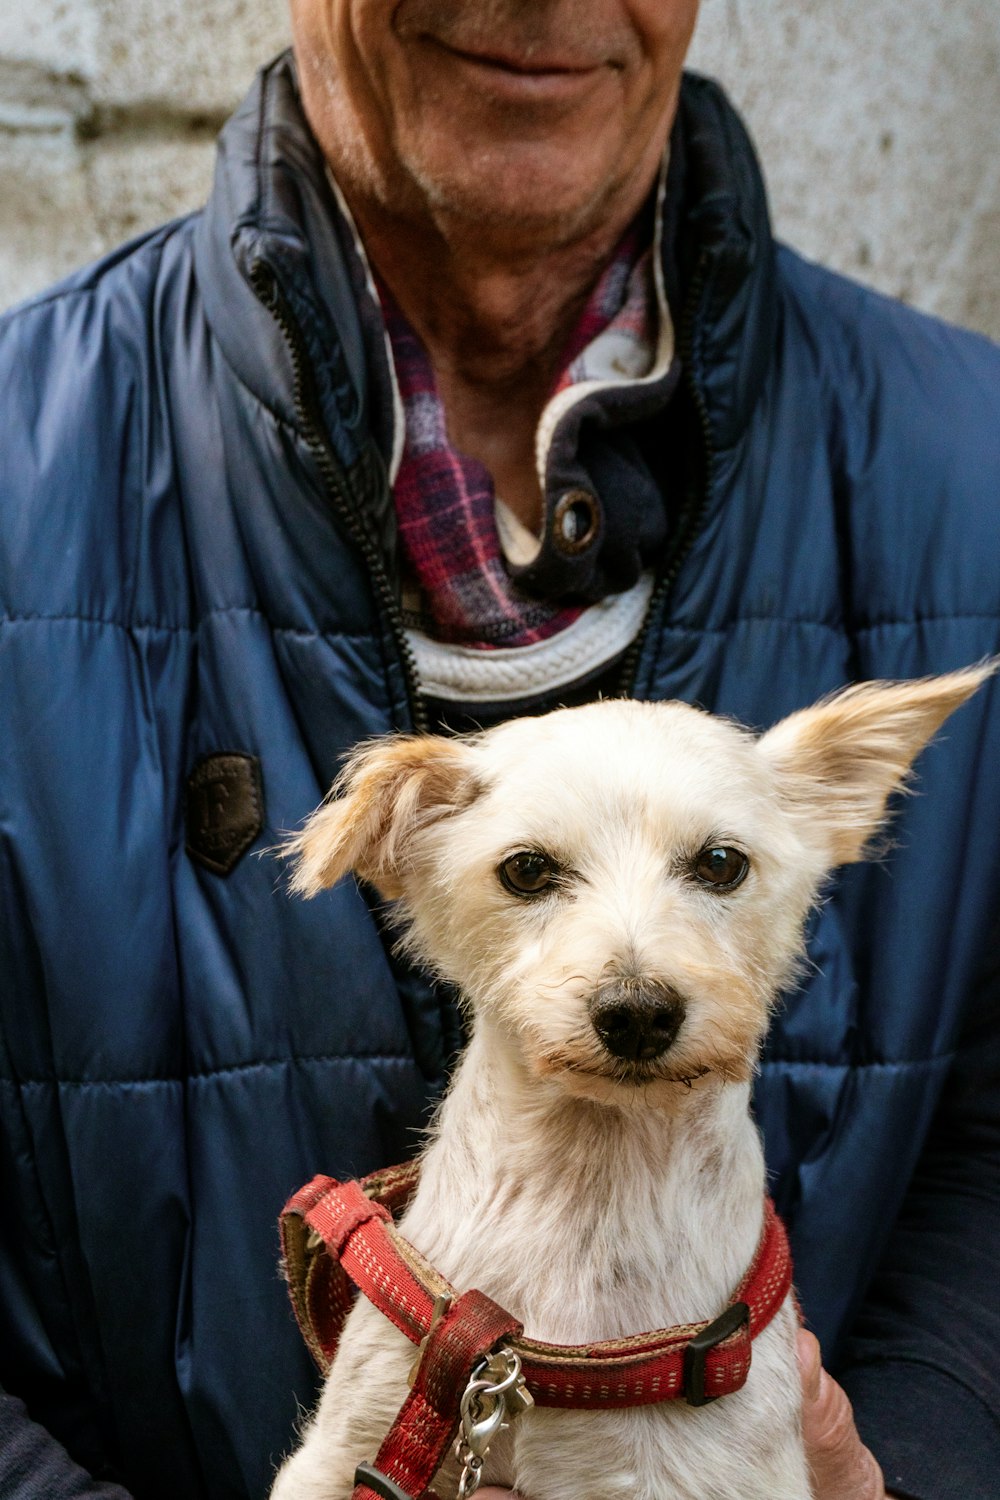 a man holding a small white dog wearing a harness